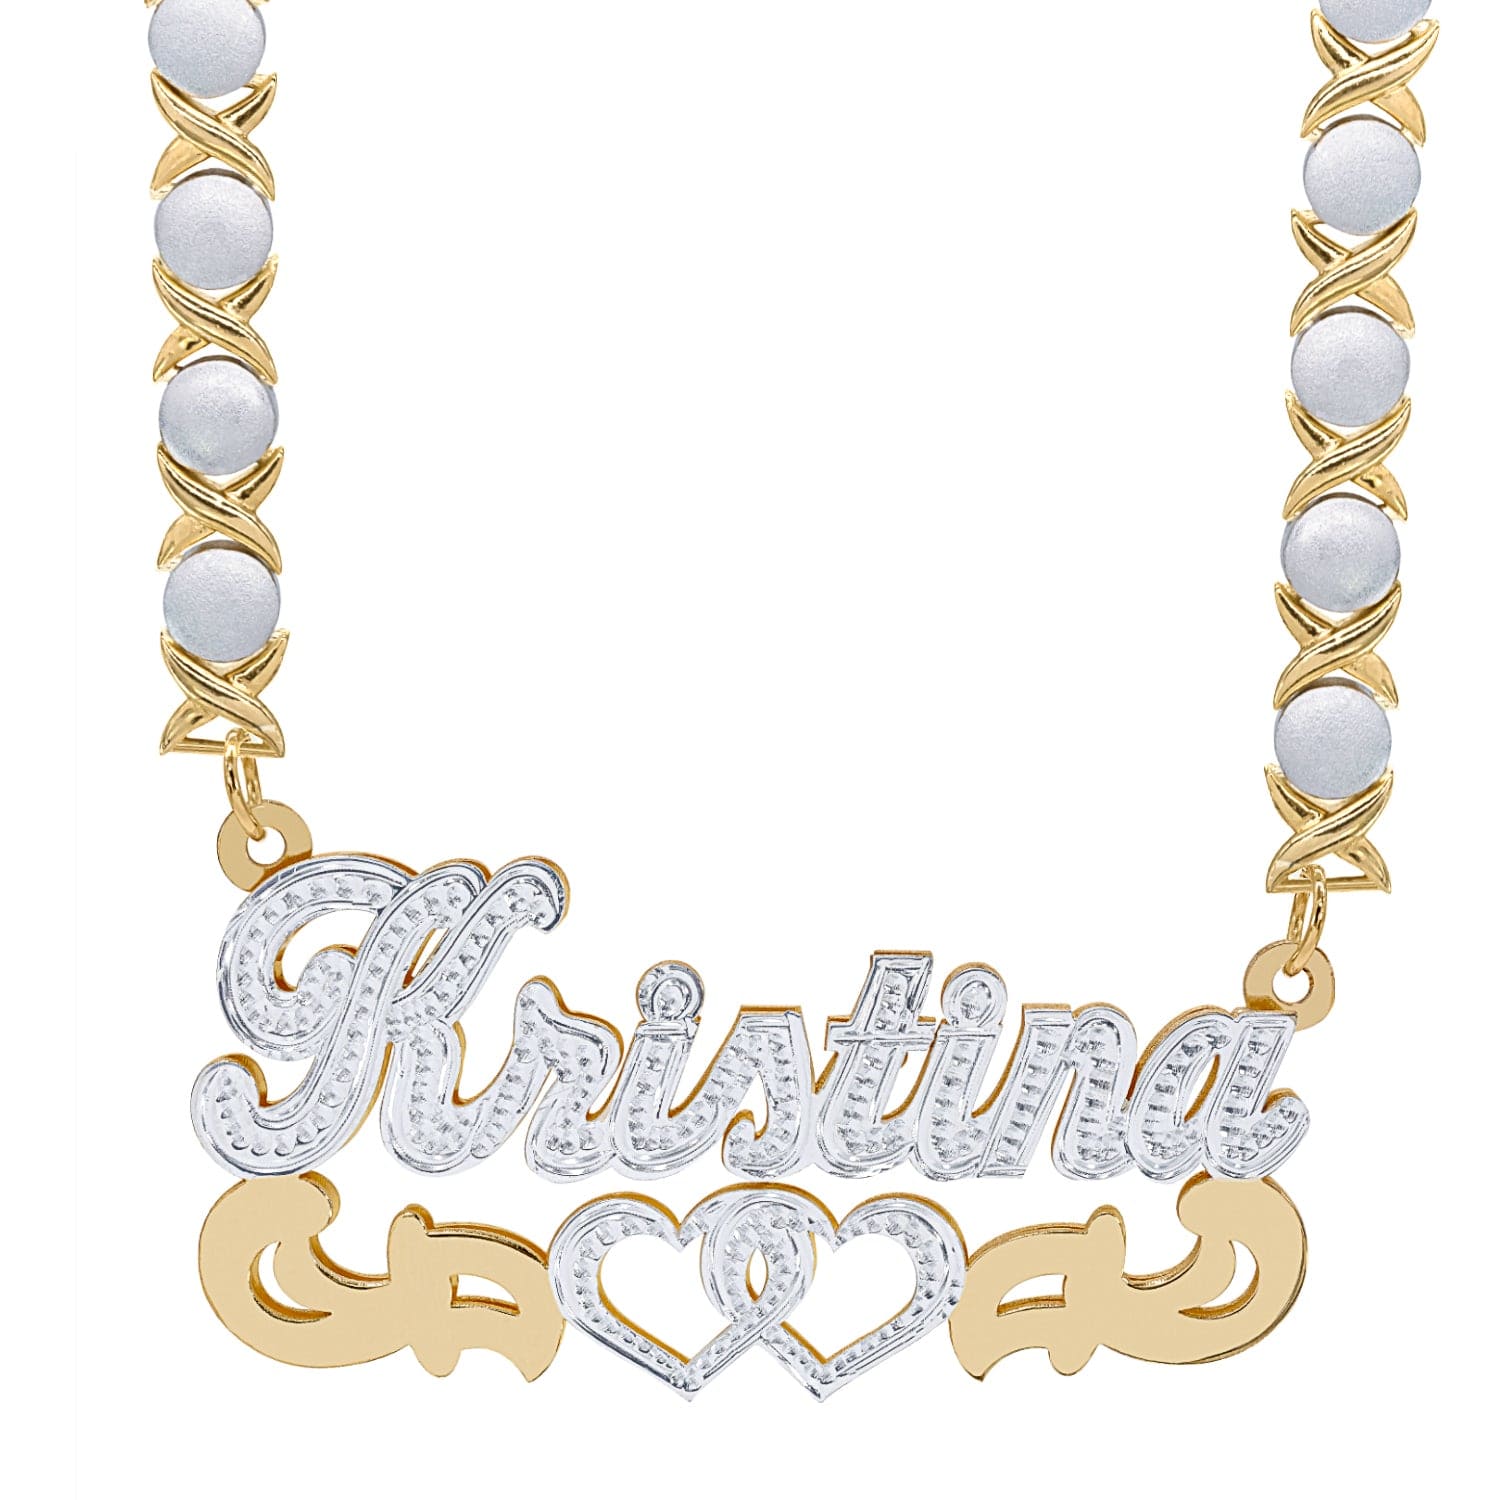 Two-Tone. Sterling Silver / Rhodium Xoxo Chain Double Nameplate Necklace "Kristina" with Rhodium Xoxo Chain